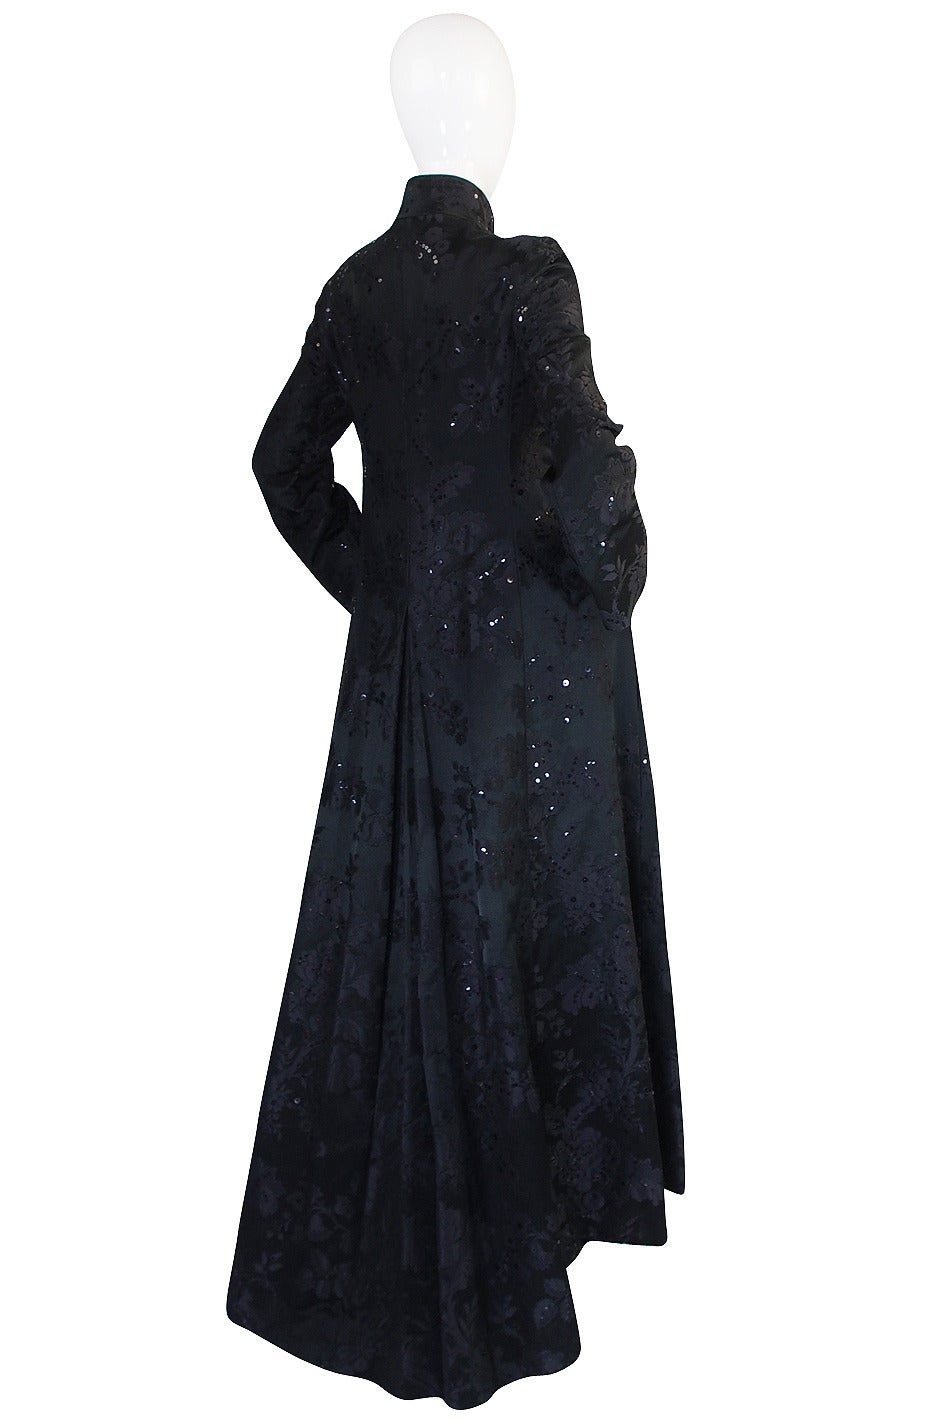 Phenomenal black silk opera or evening coat that was certainly a custom piece. It is exquisite in its cut and design with the simplicity and stark lines allowing that beautiful silk brocade and brilliant cut to take center stage. The fabric is a